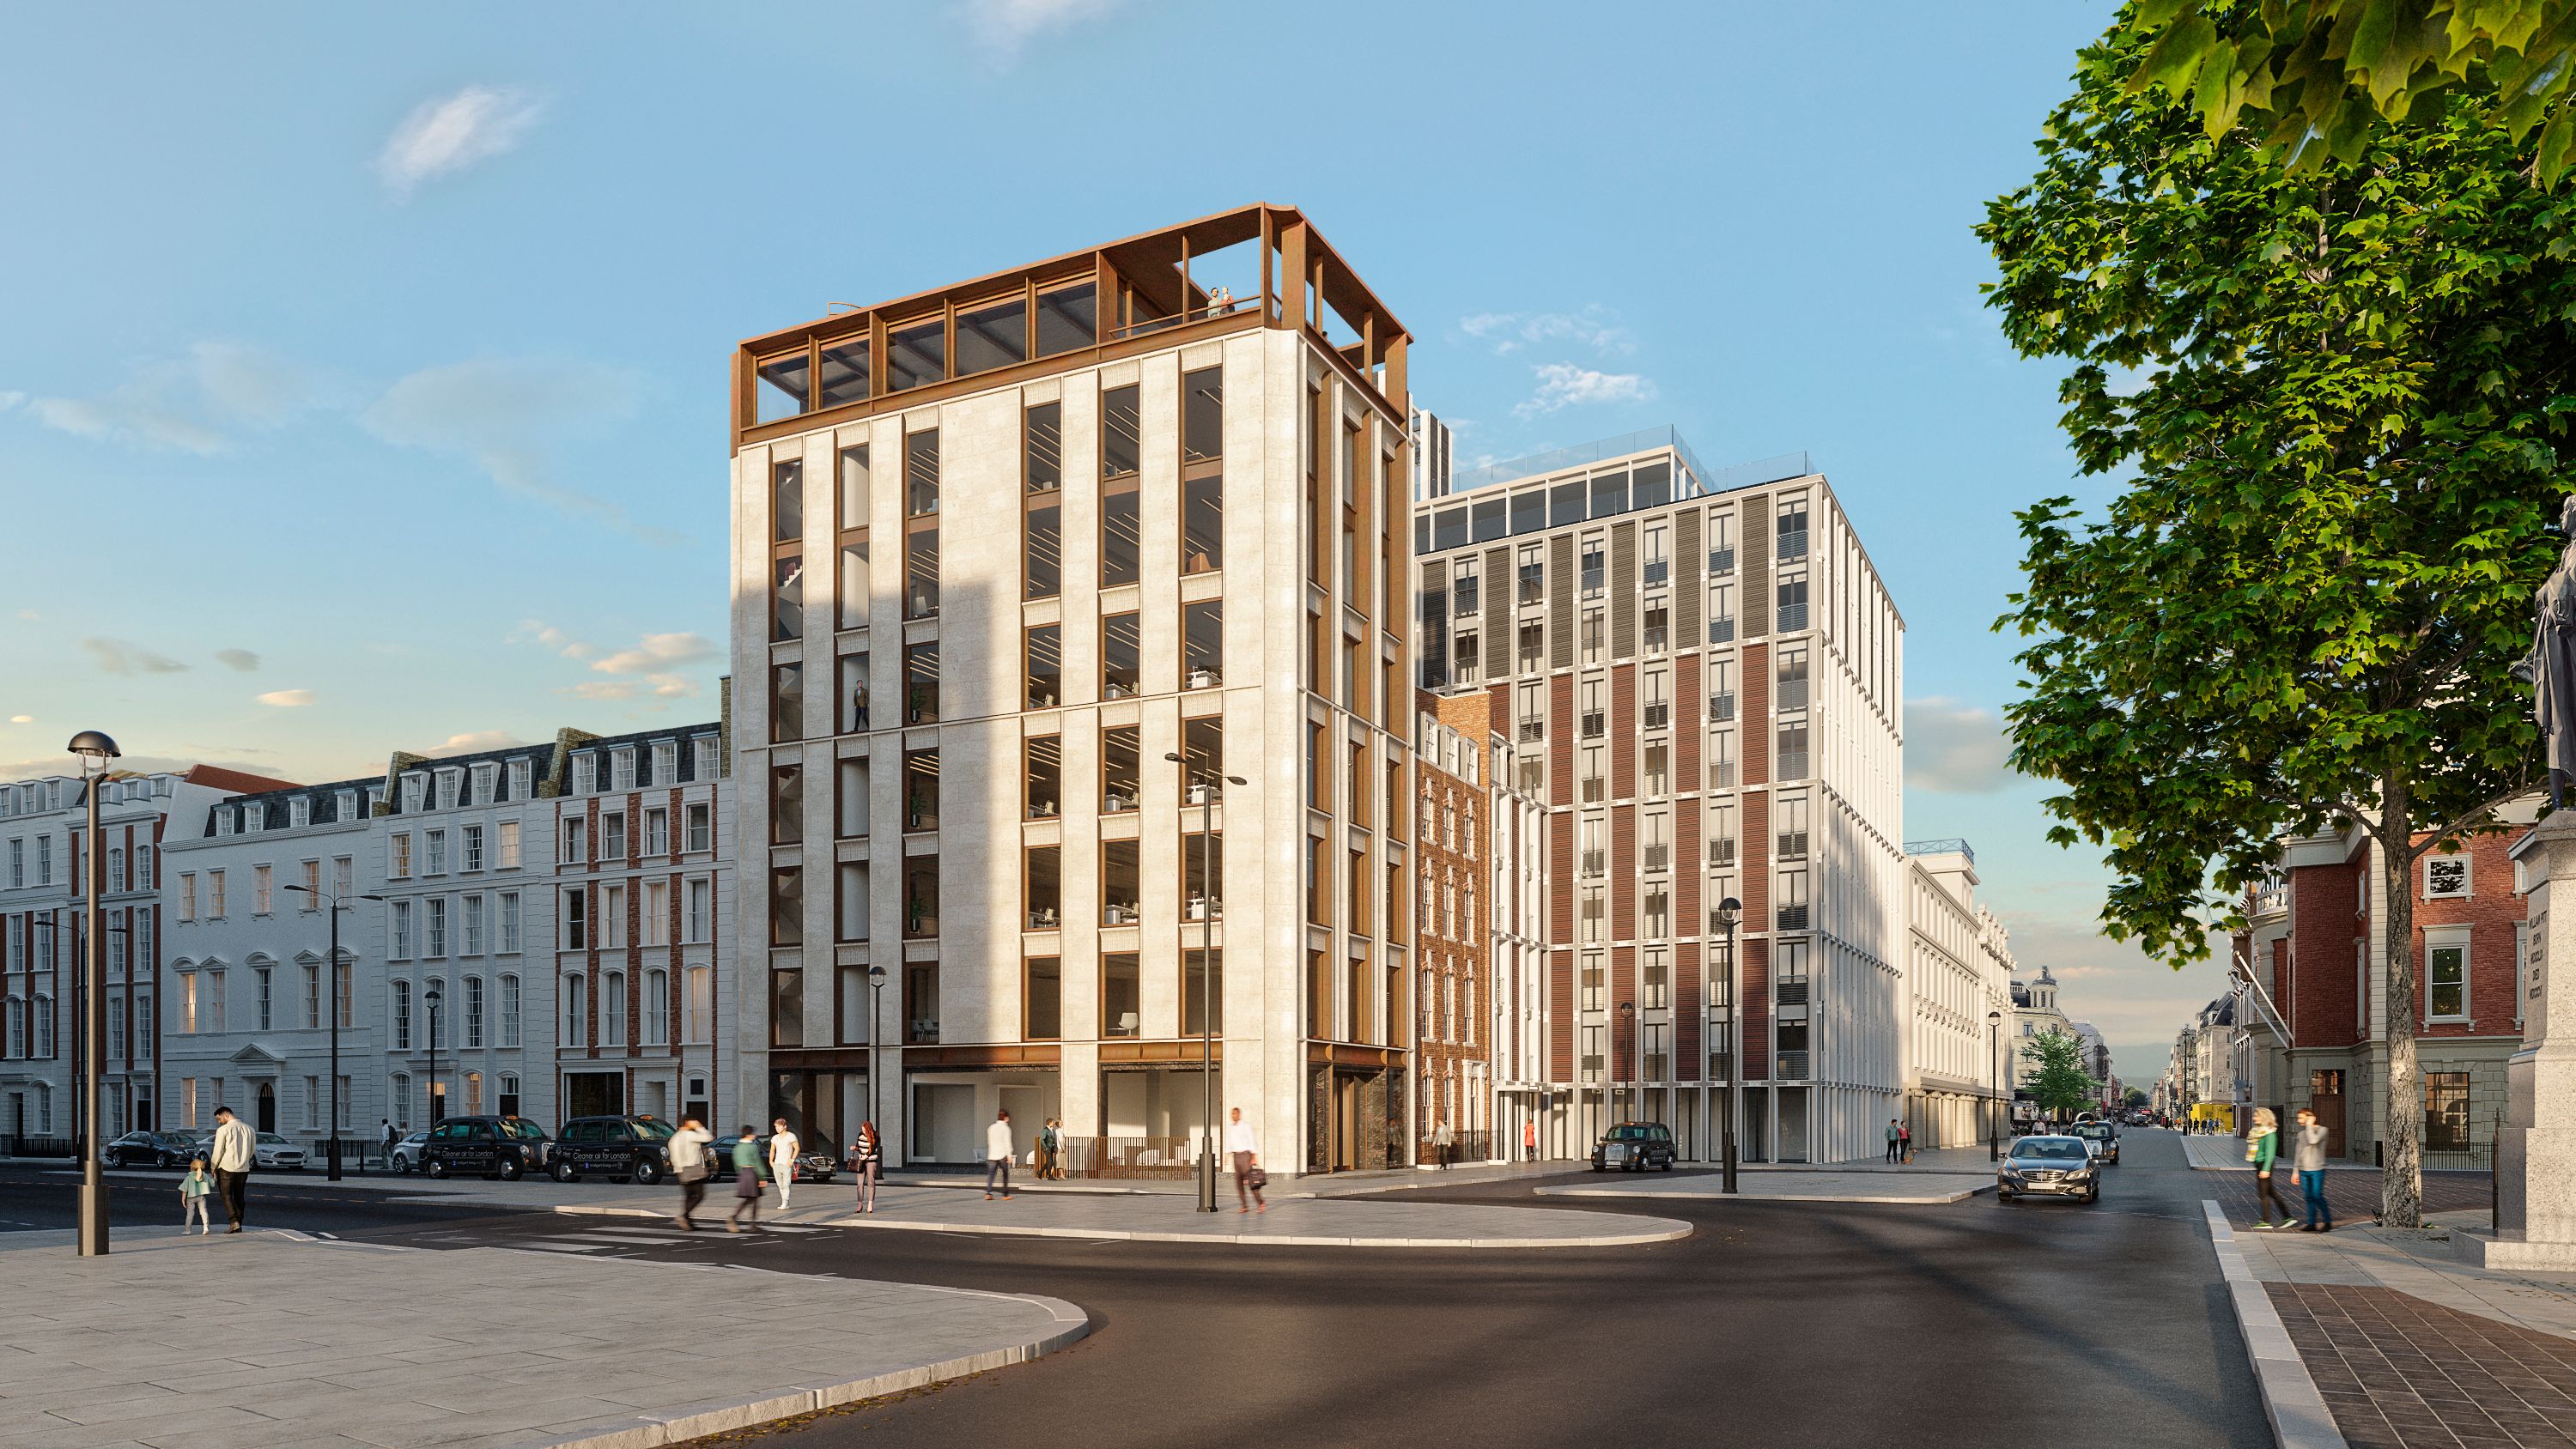 Building Design reviews world-first material process for 25 Hanover Square